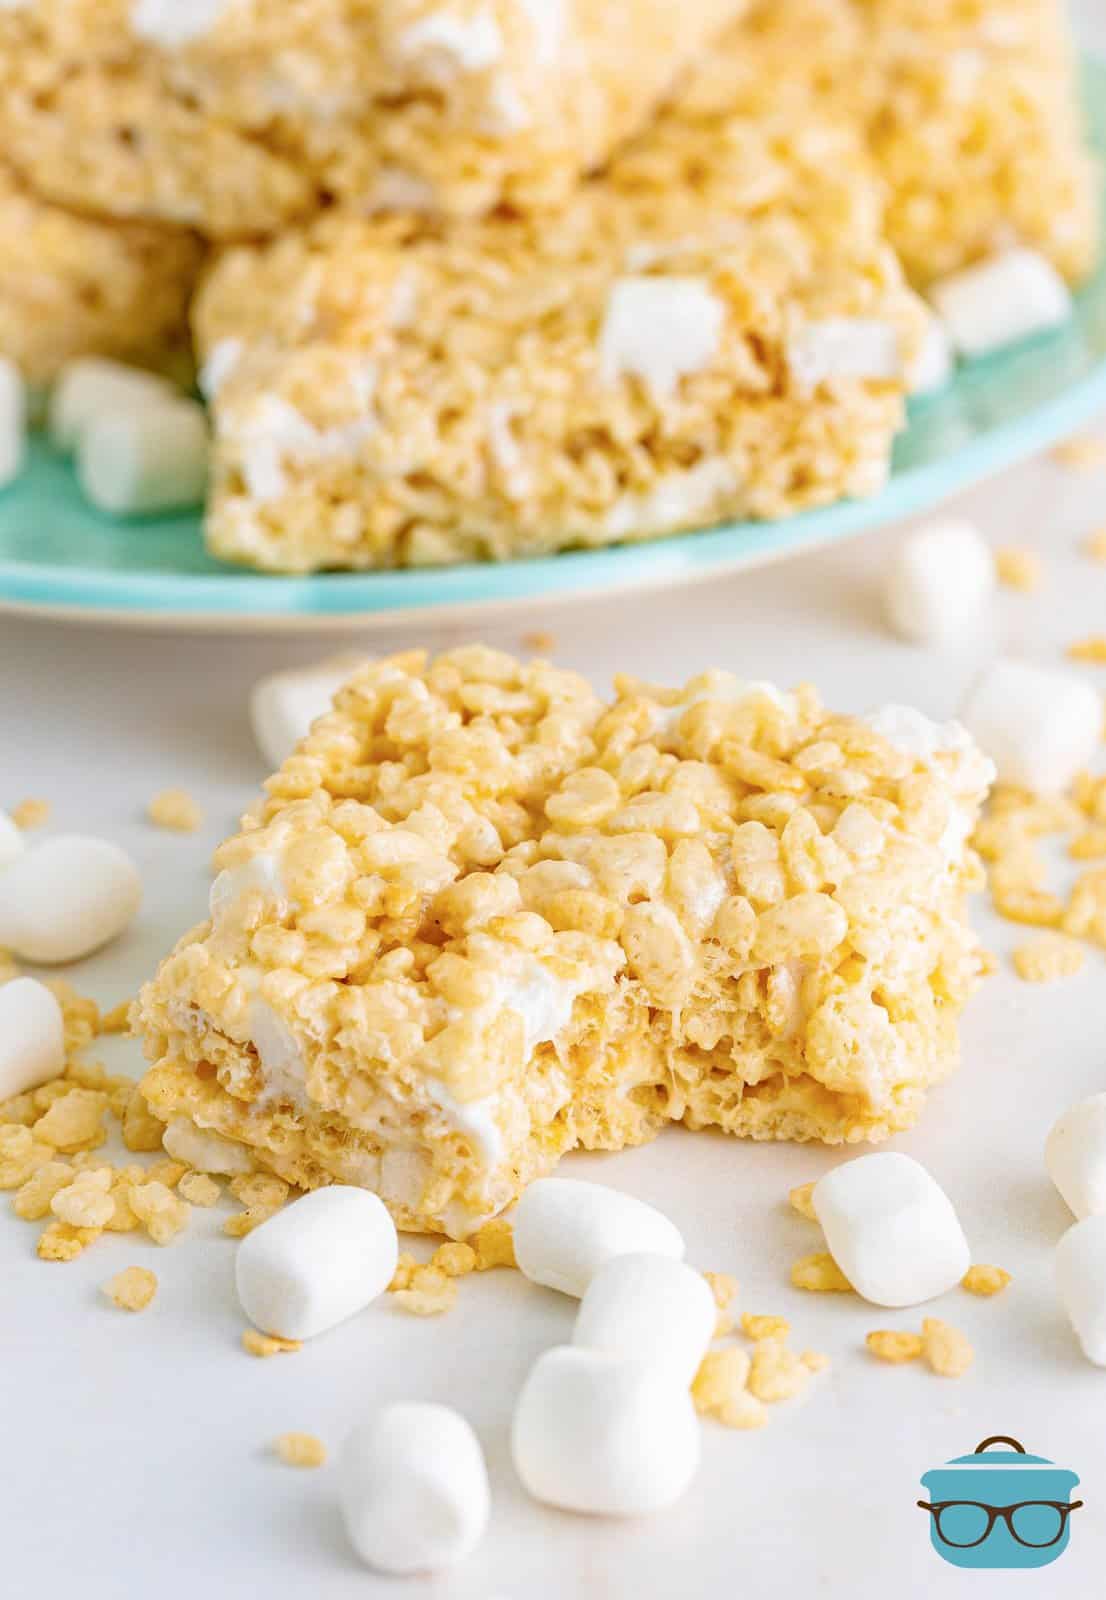 A rice krispie treat with a bite taken out of it and mini marshmallows around it.